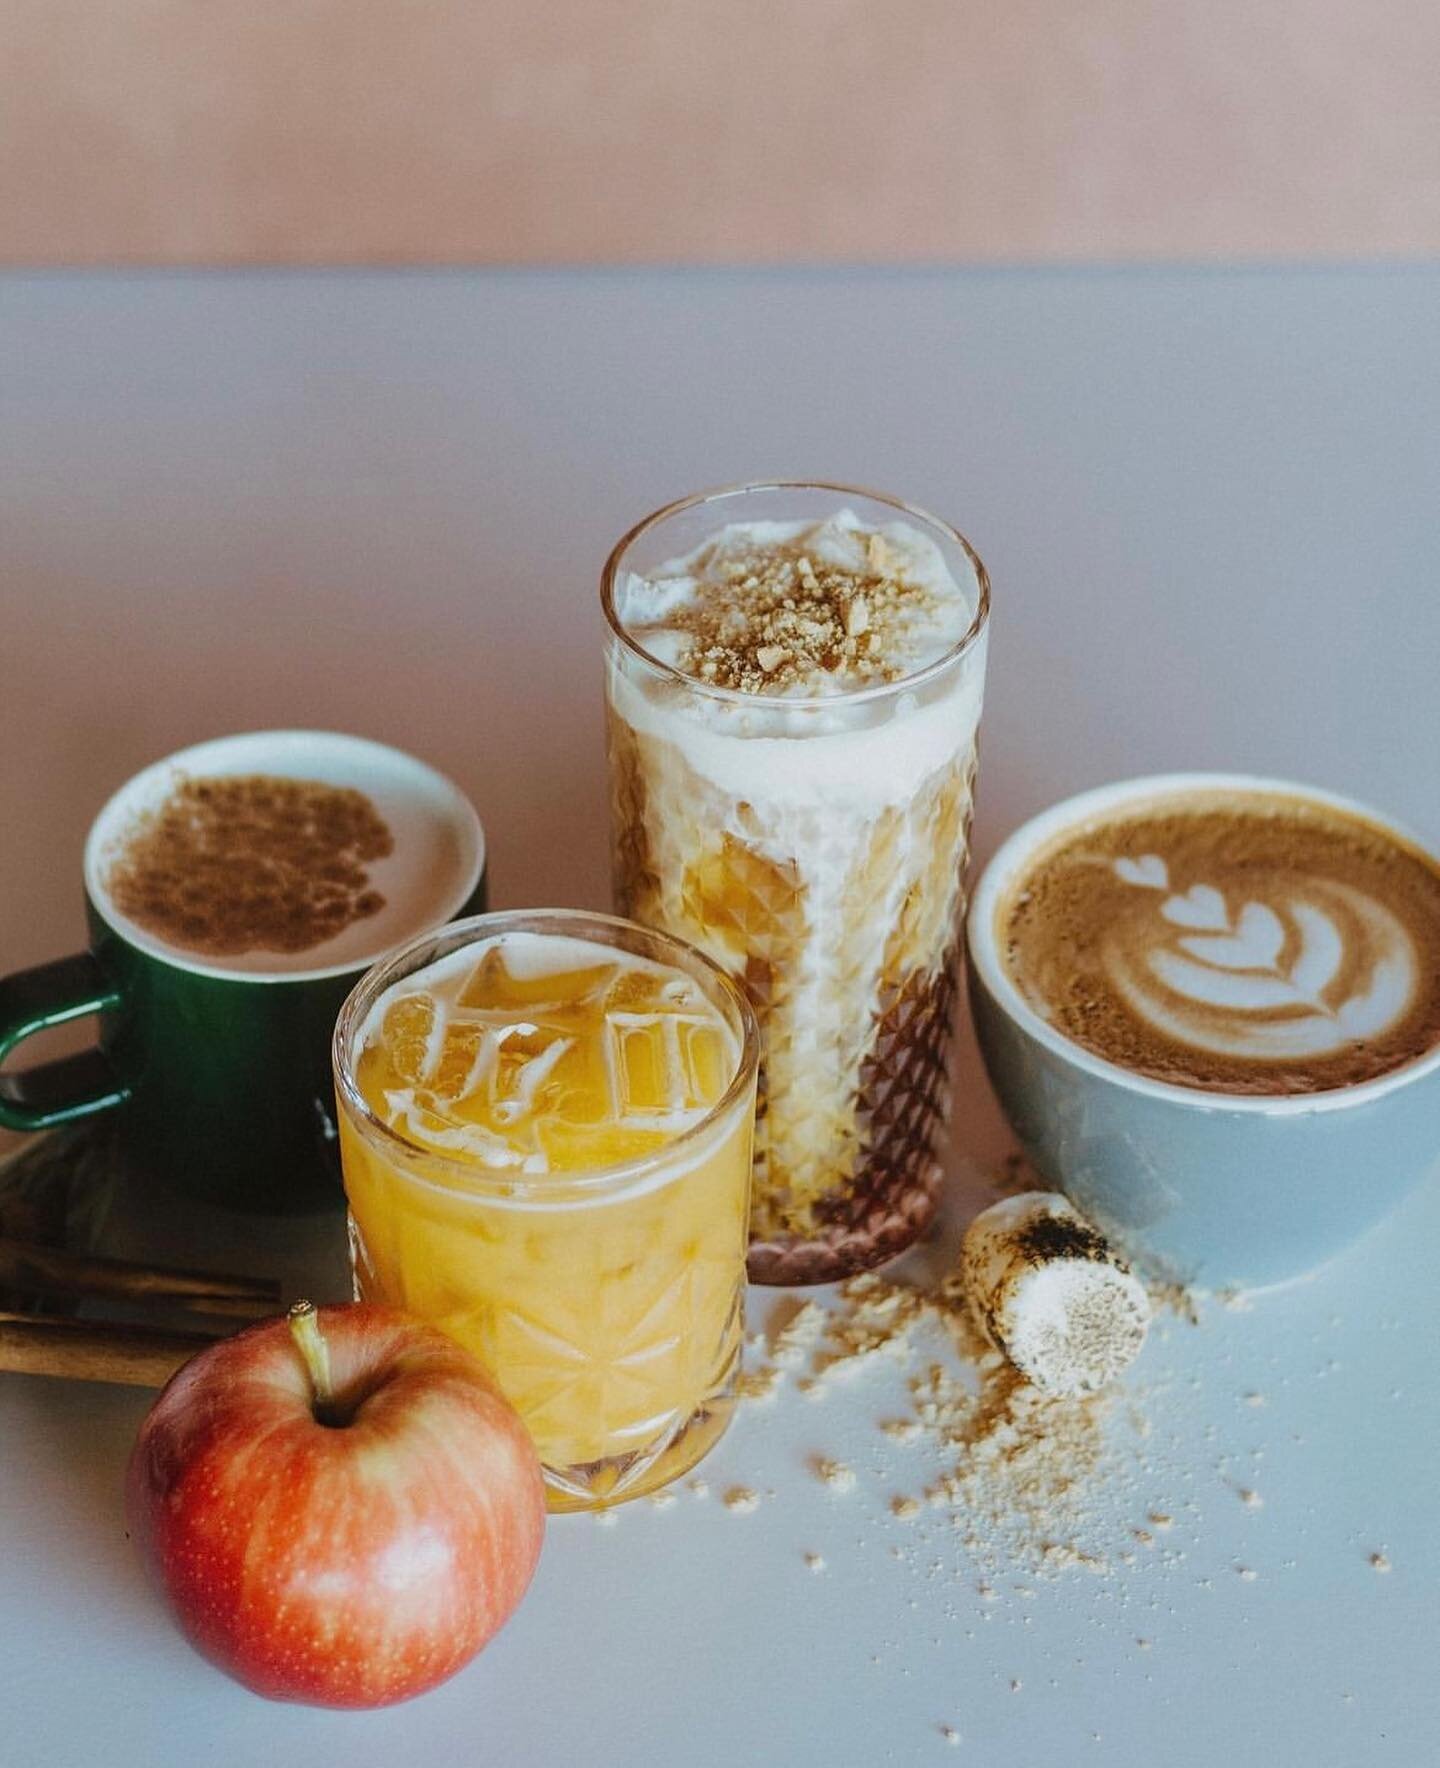 Have you tried @likewisecoffeetx fall menu!? The Spiced Pumpkin Punch will make you go &ldquo;oh my gourd!&rdquo; Speaking of gourds&hellip;they are hosting a Pumpkin Painting for mamas and littles on Monday, details in the post👆🏽